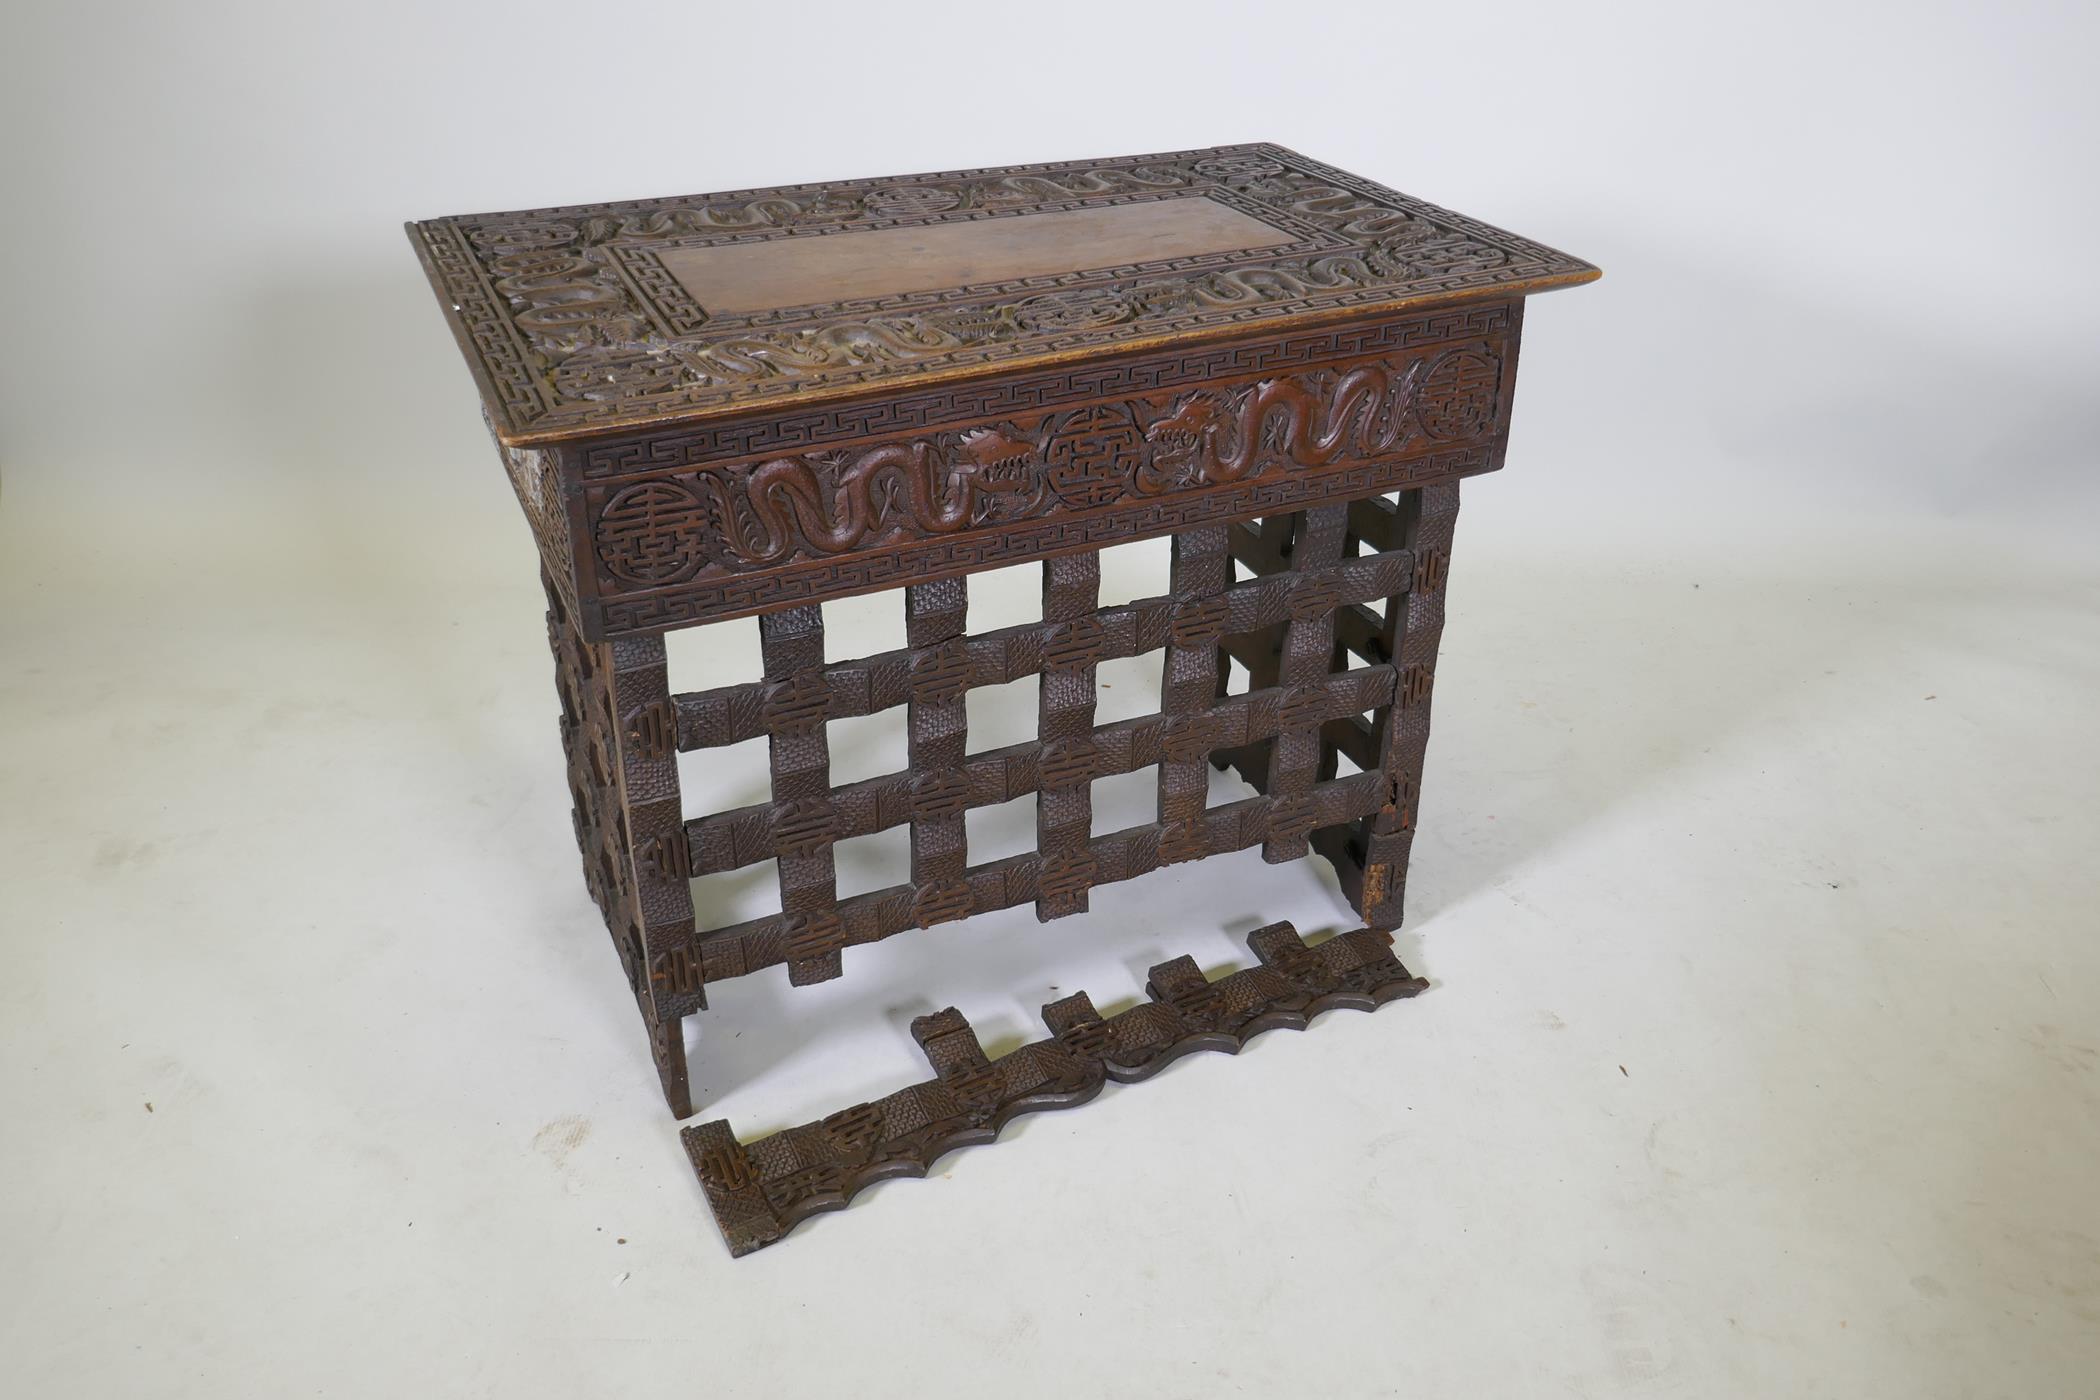 A C19th Chinese carved hardwood travel desk with a pierced folding base, decorated with dragons - Image 5 of 7